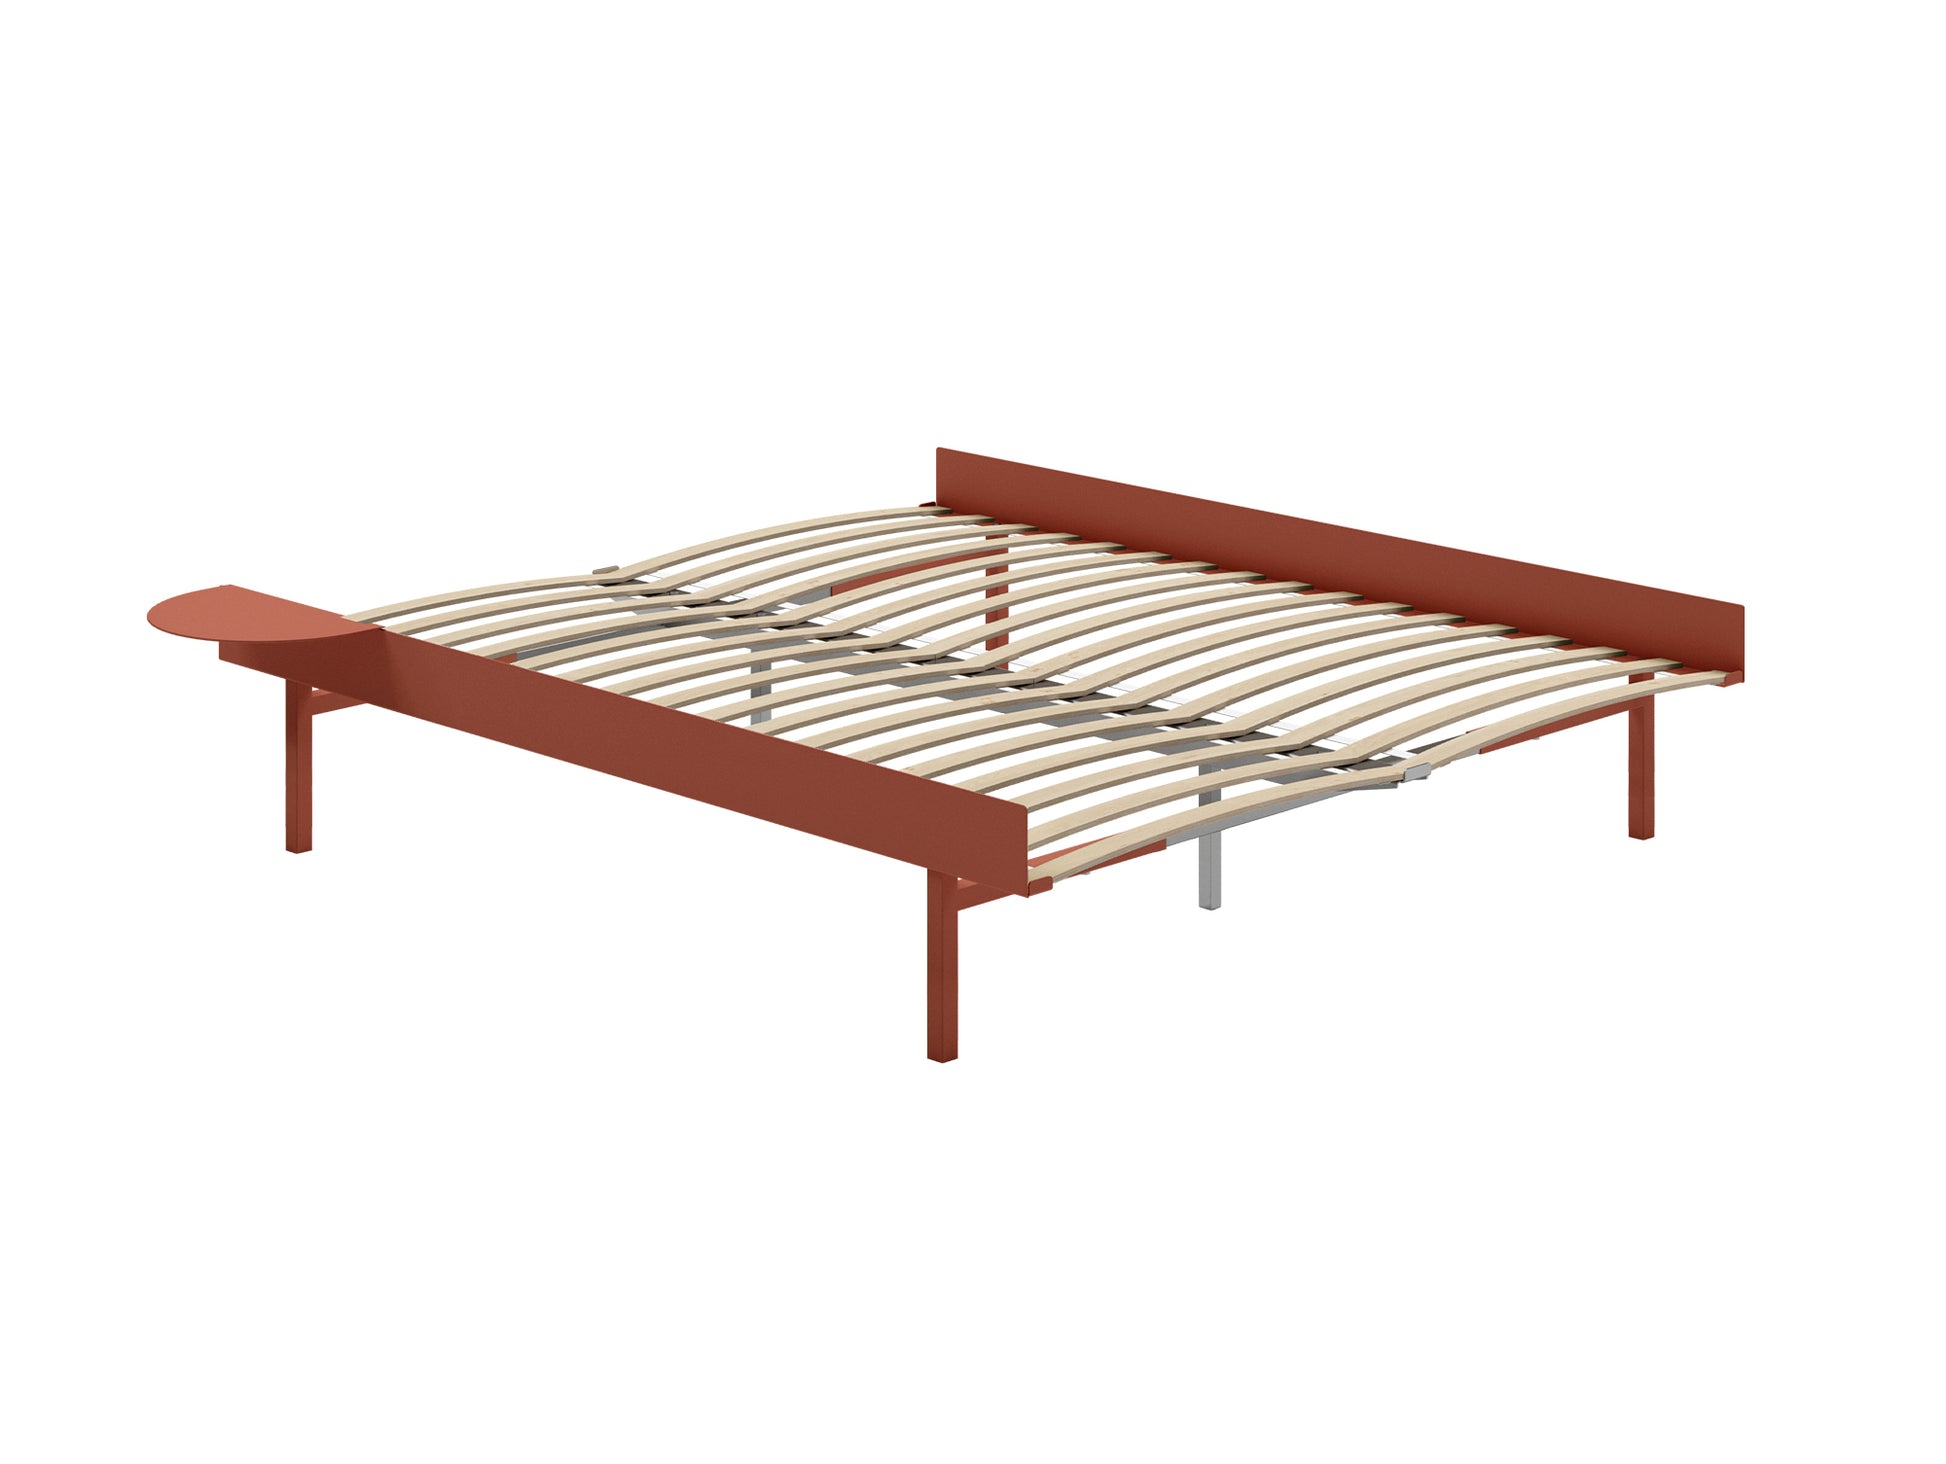 Bed 90 - 180 cm (High) by Moebe- Bed Frame / with 160cm wide Slats / 1 Side Table / Terracotta